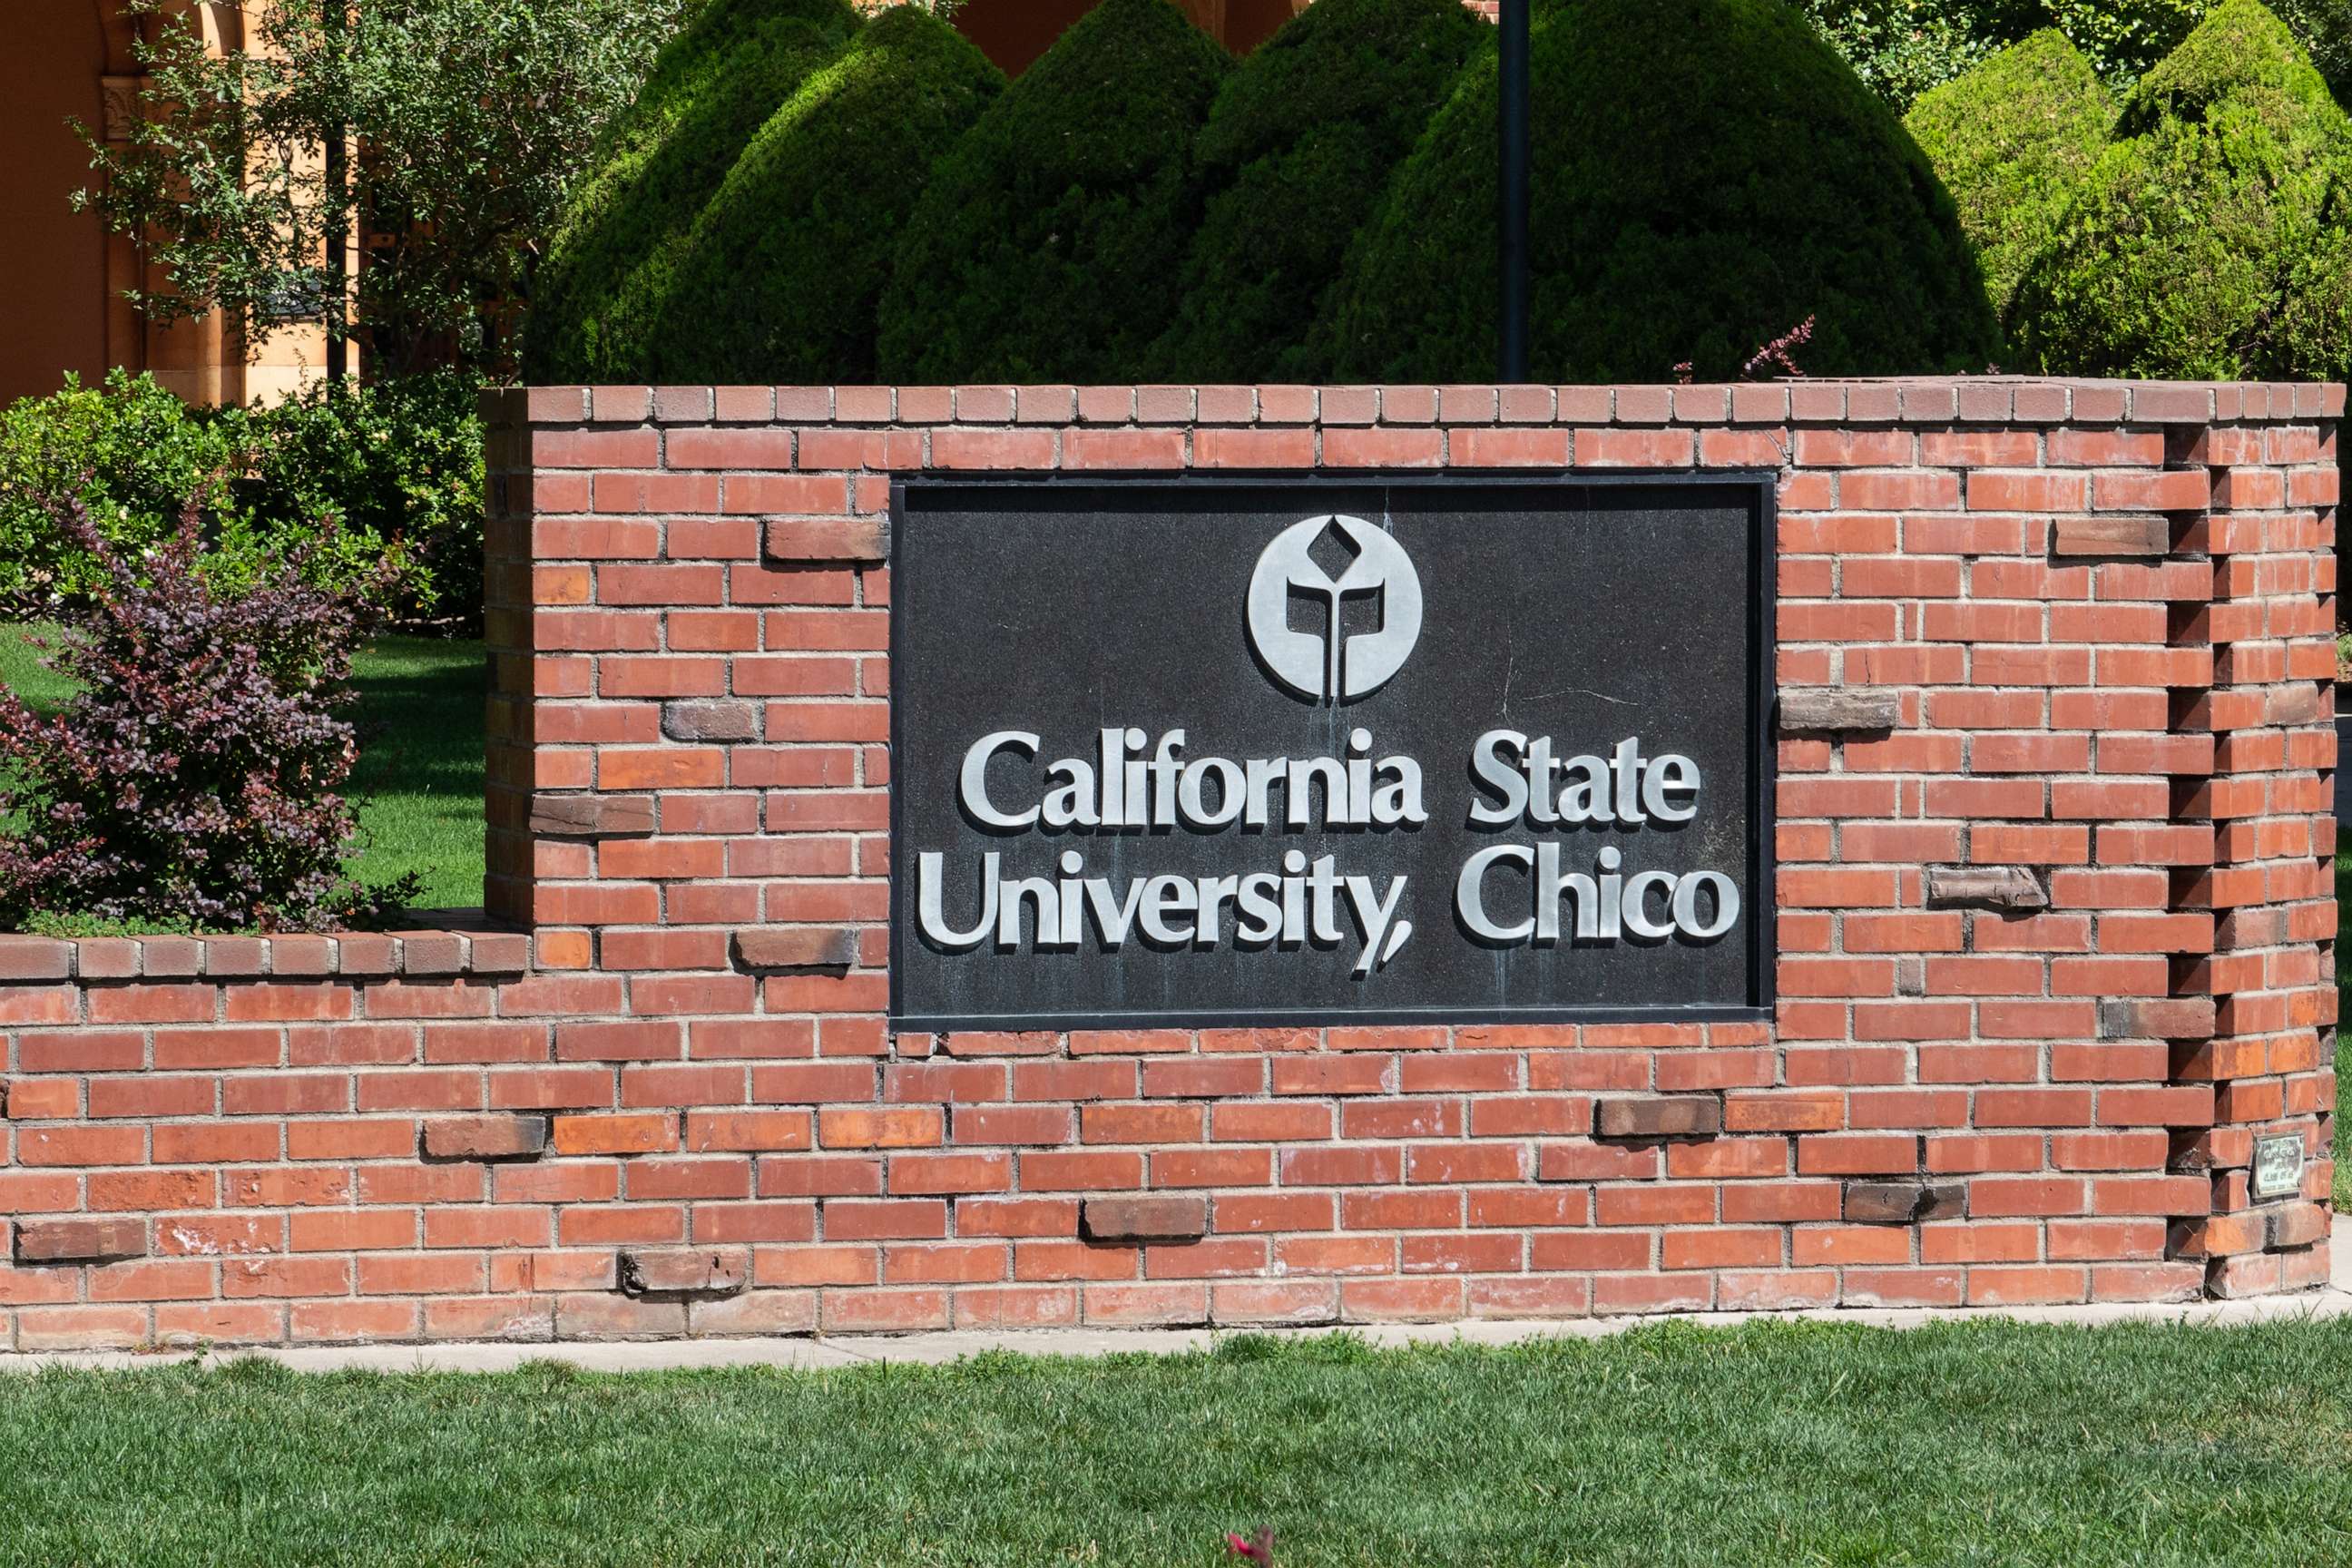 PHOTO: The California State University Chico, also known as Chico State, July 9, 2019.